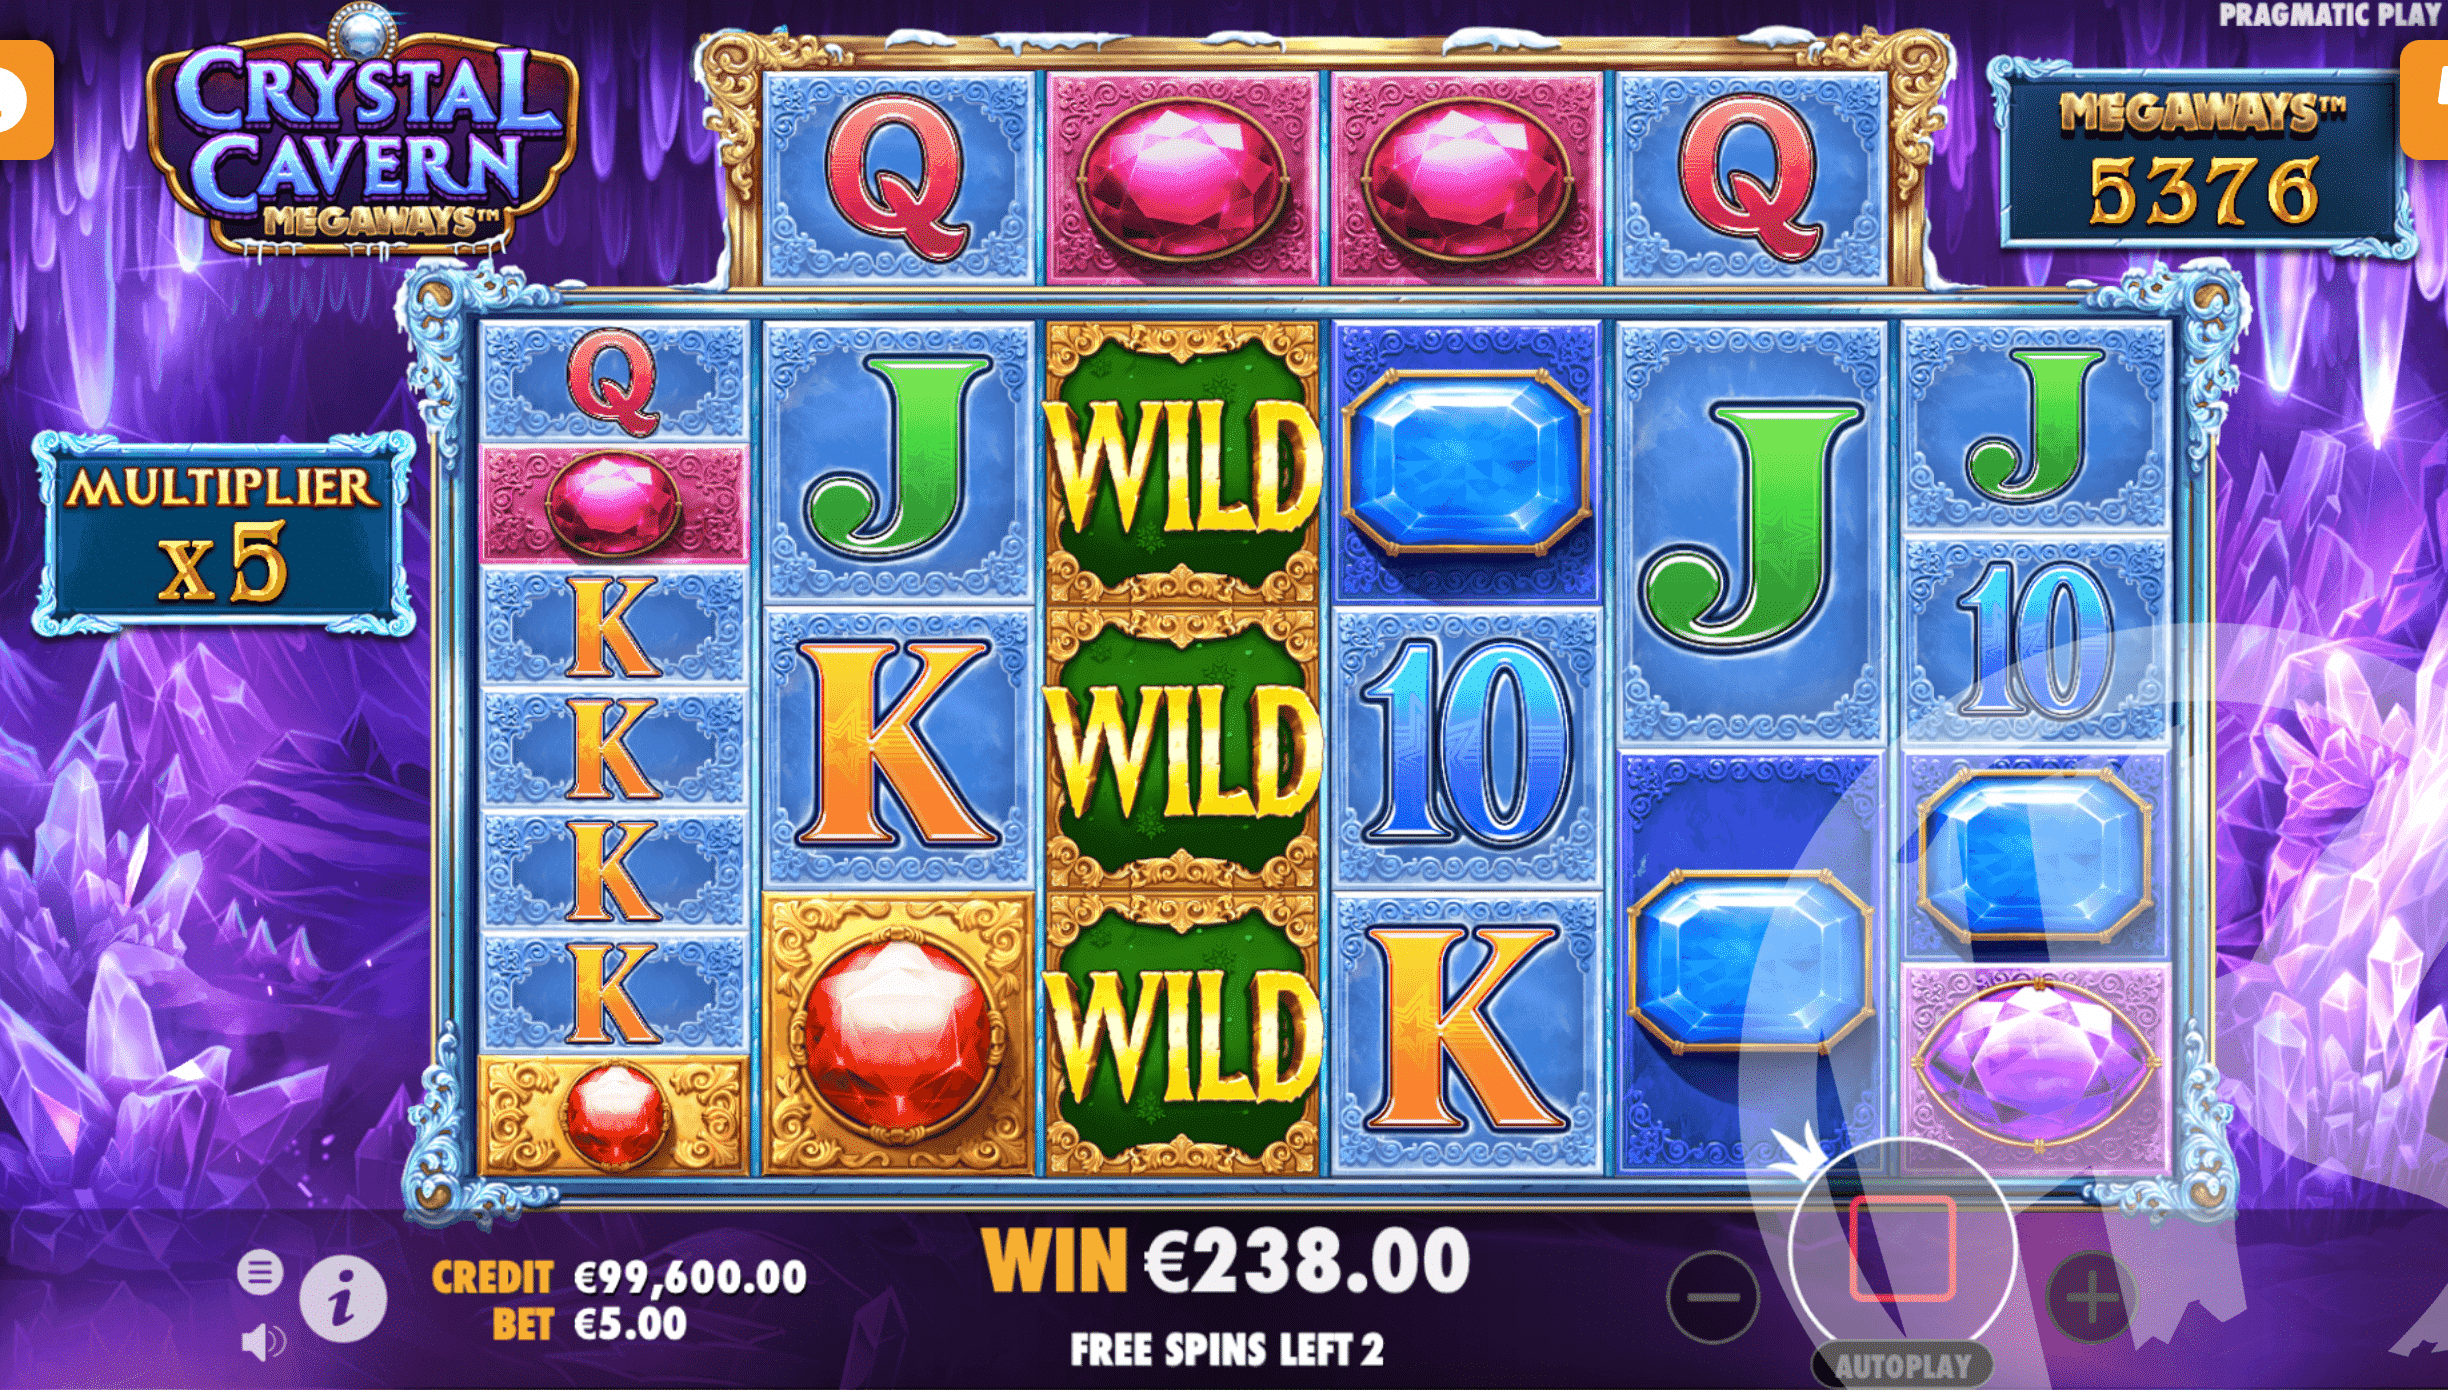 Wilds Continue to Expand During Free Spins